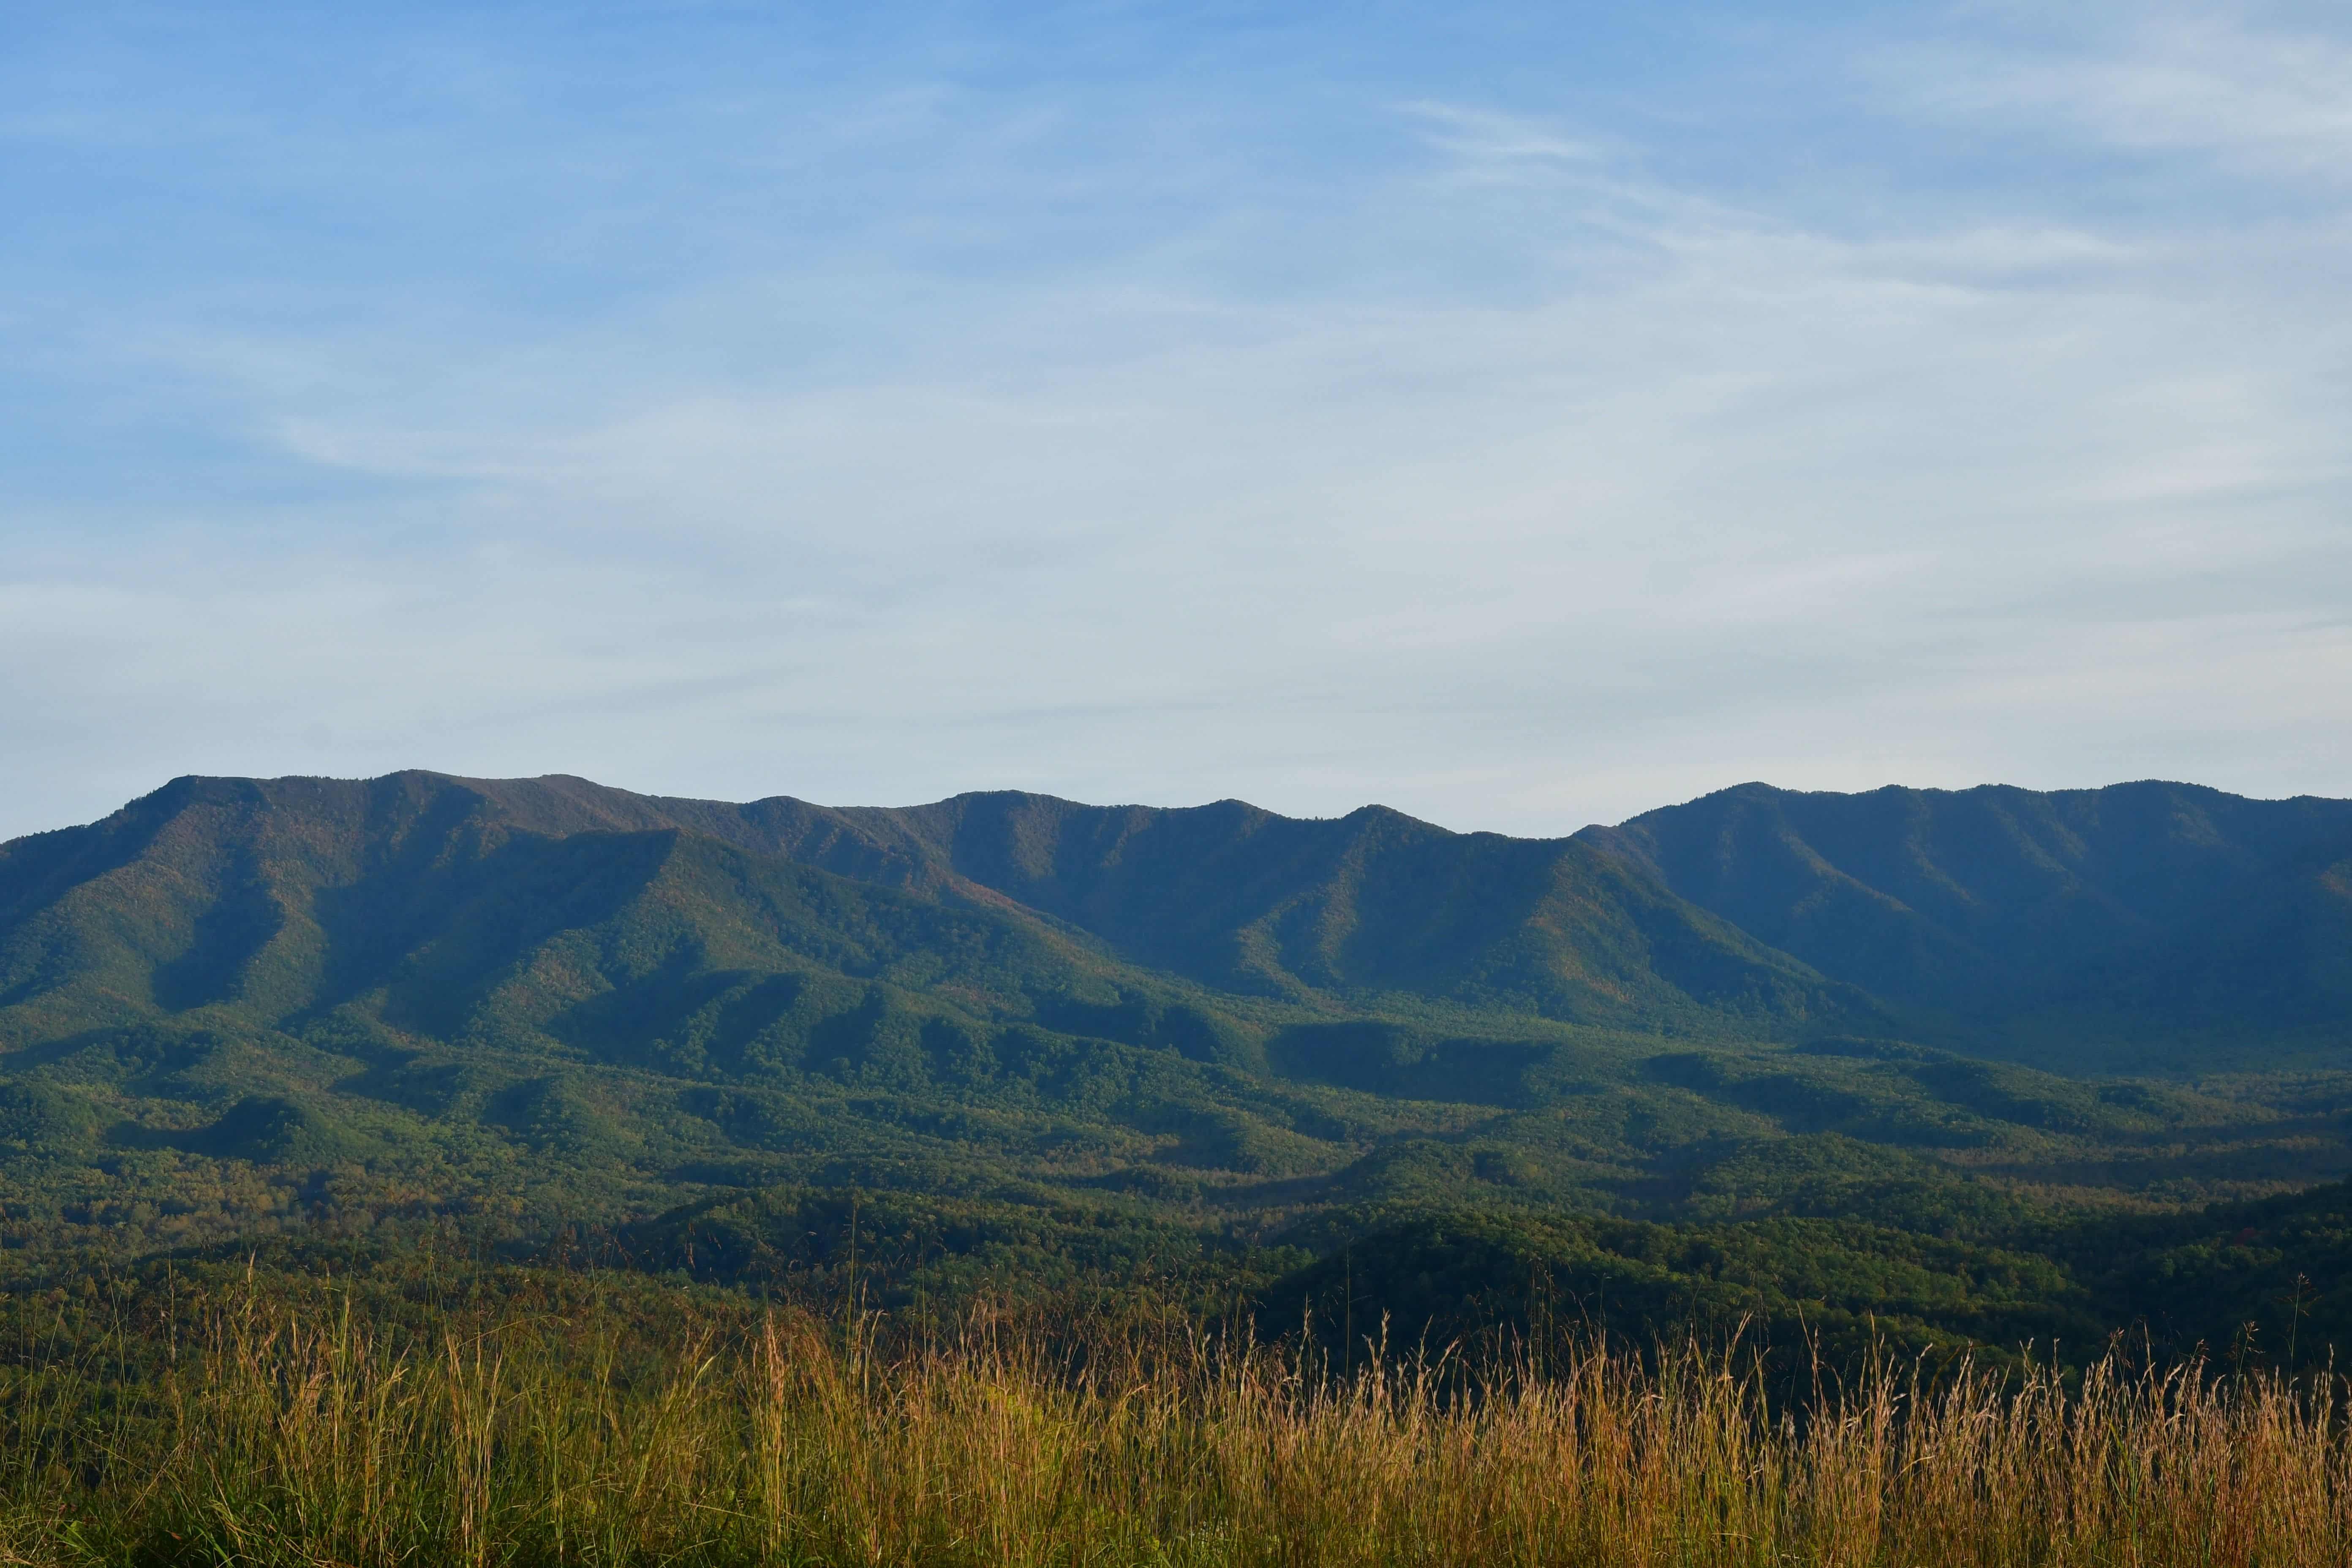 A view of the Smoky Mountains from far away.